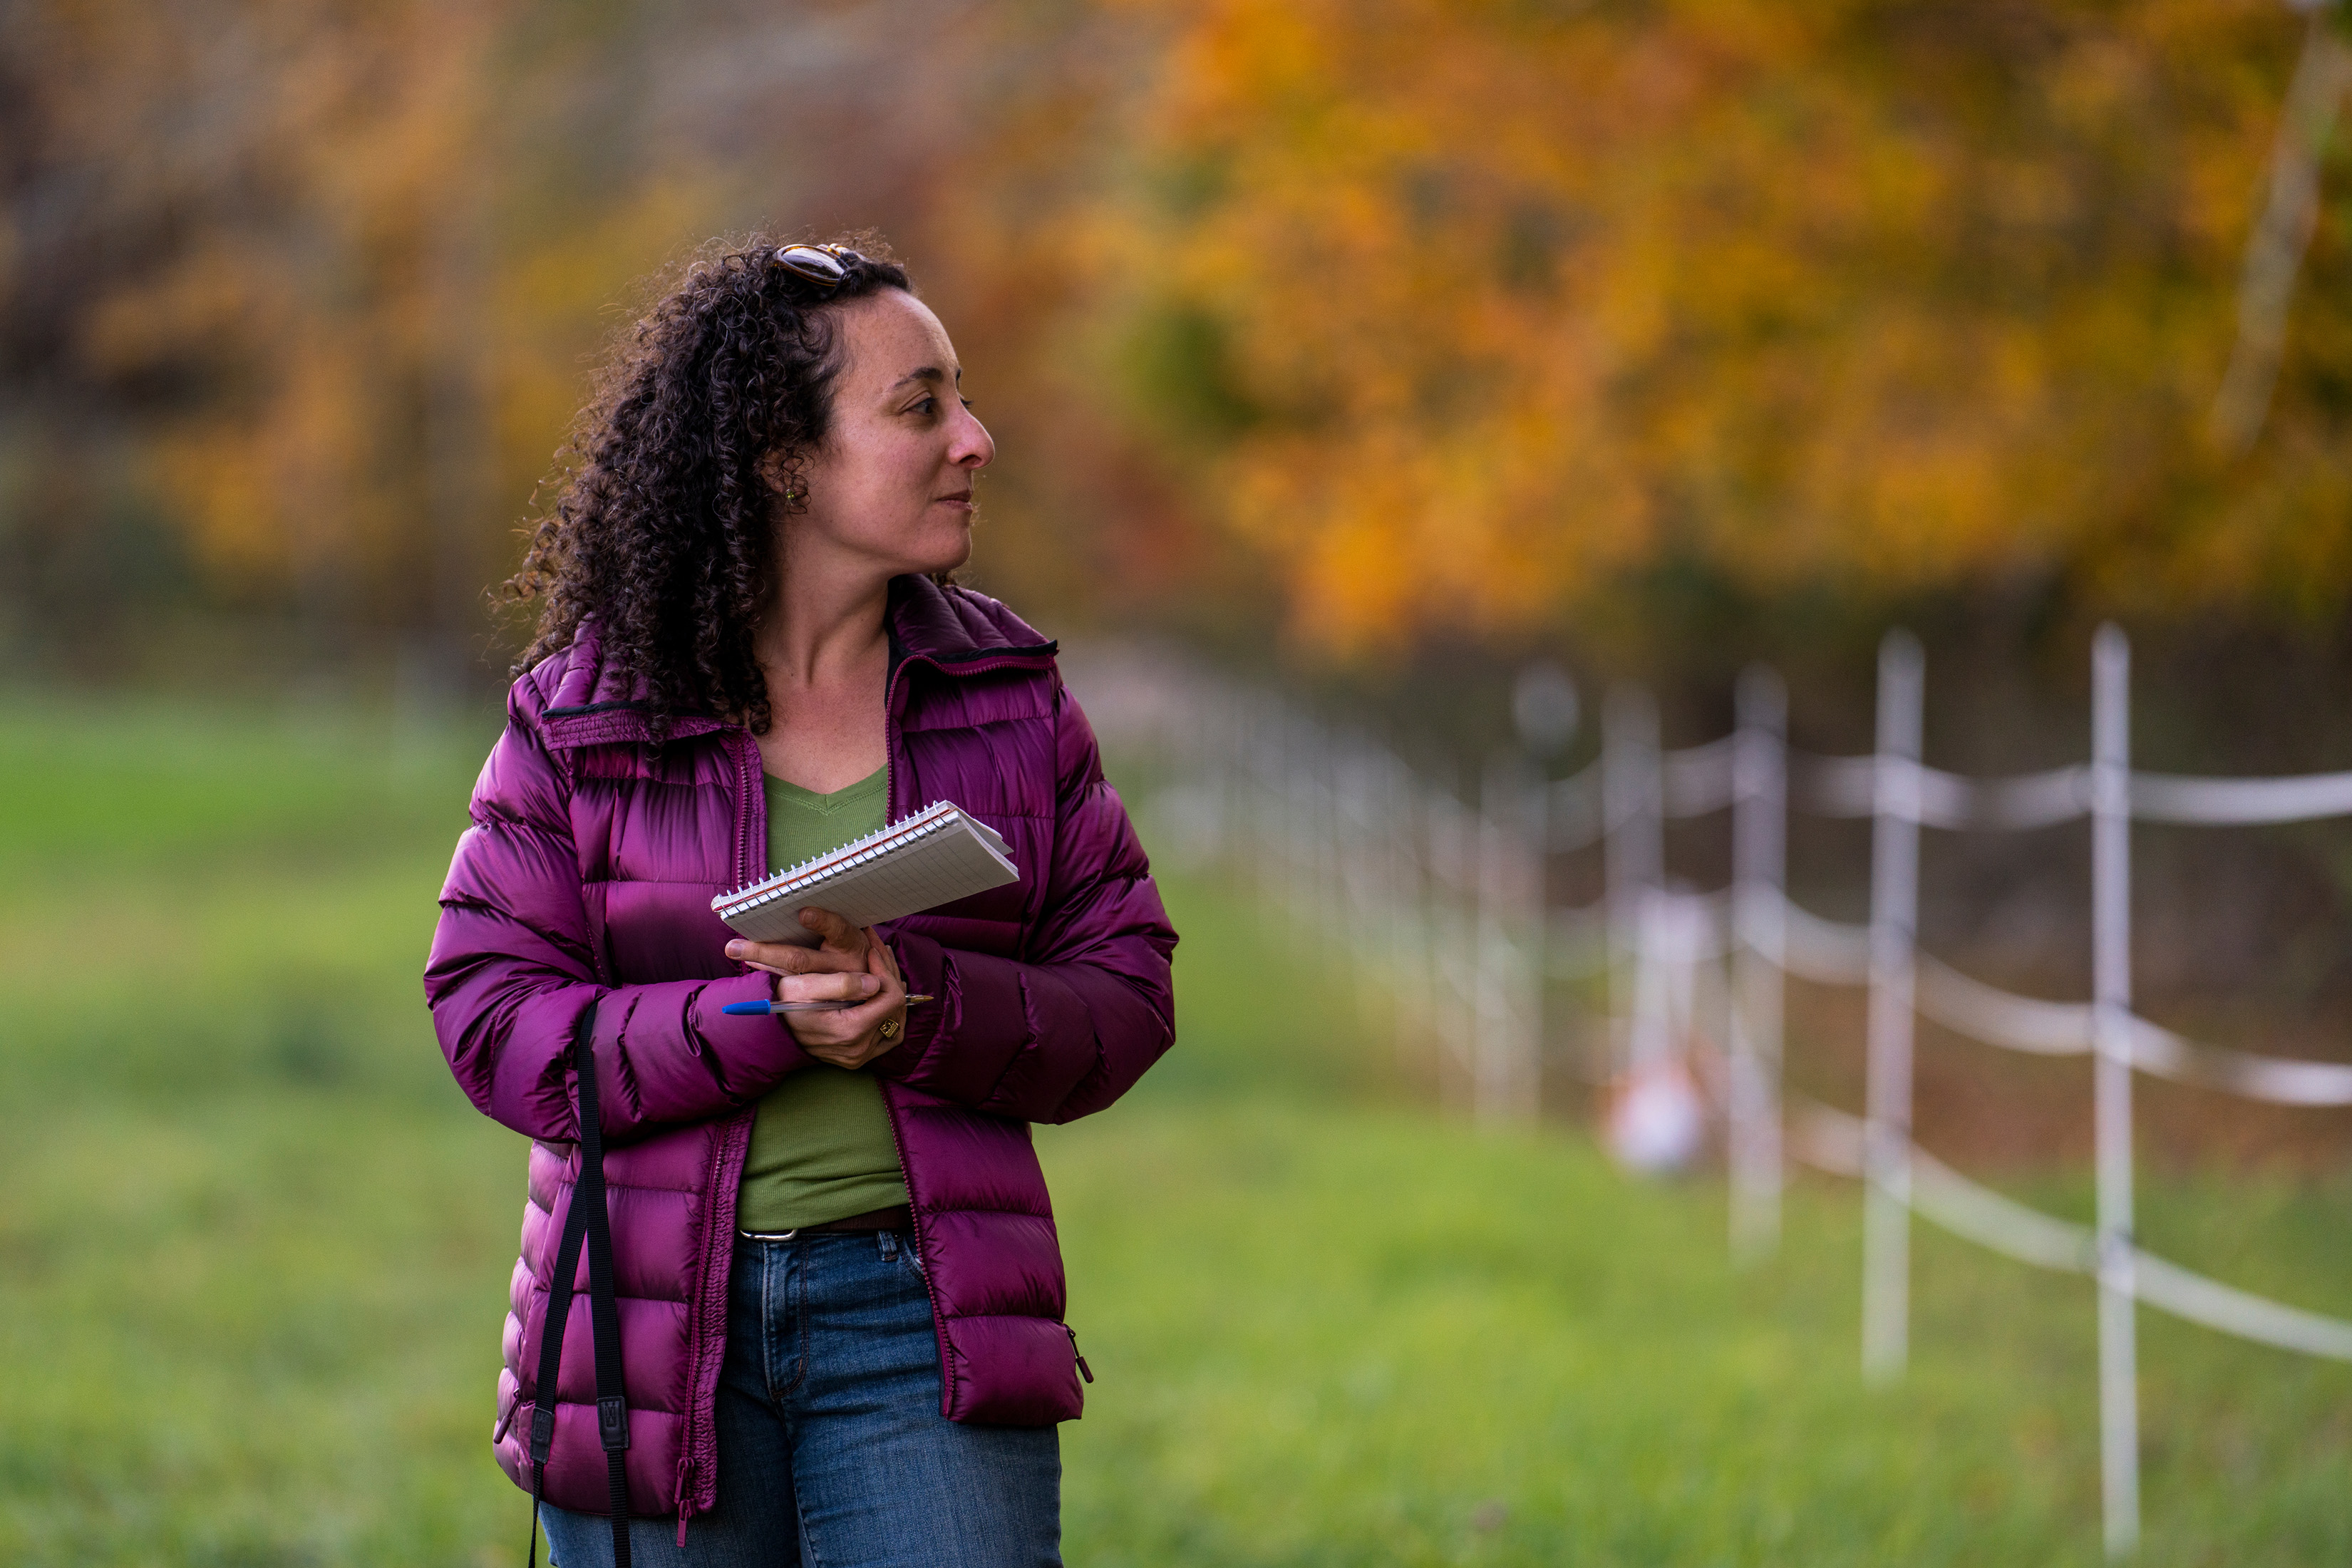 Julia Kurnik is shown walking in a field holding a notebook. Fencing and fall leaves can be seen in the blurry background.